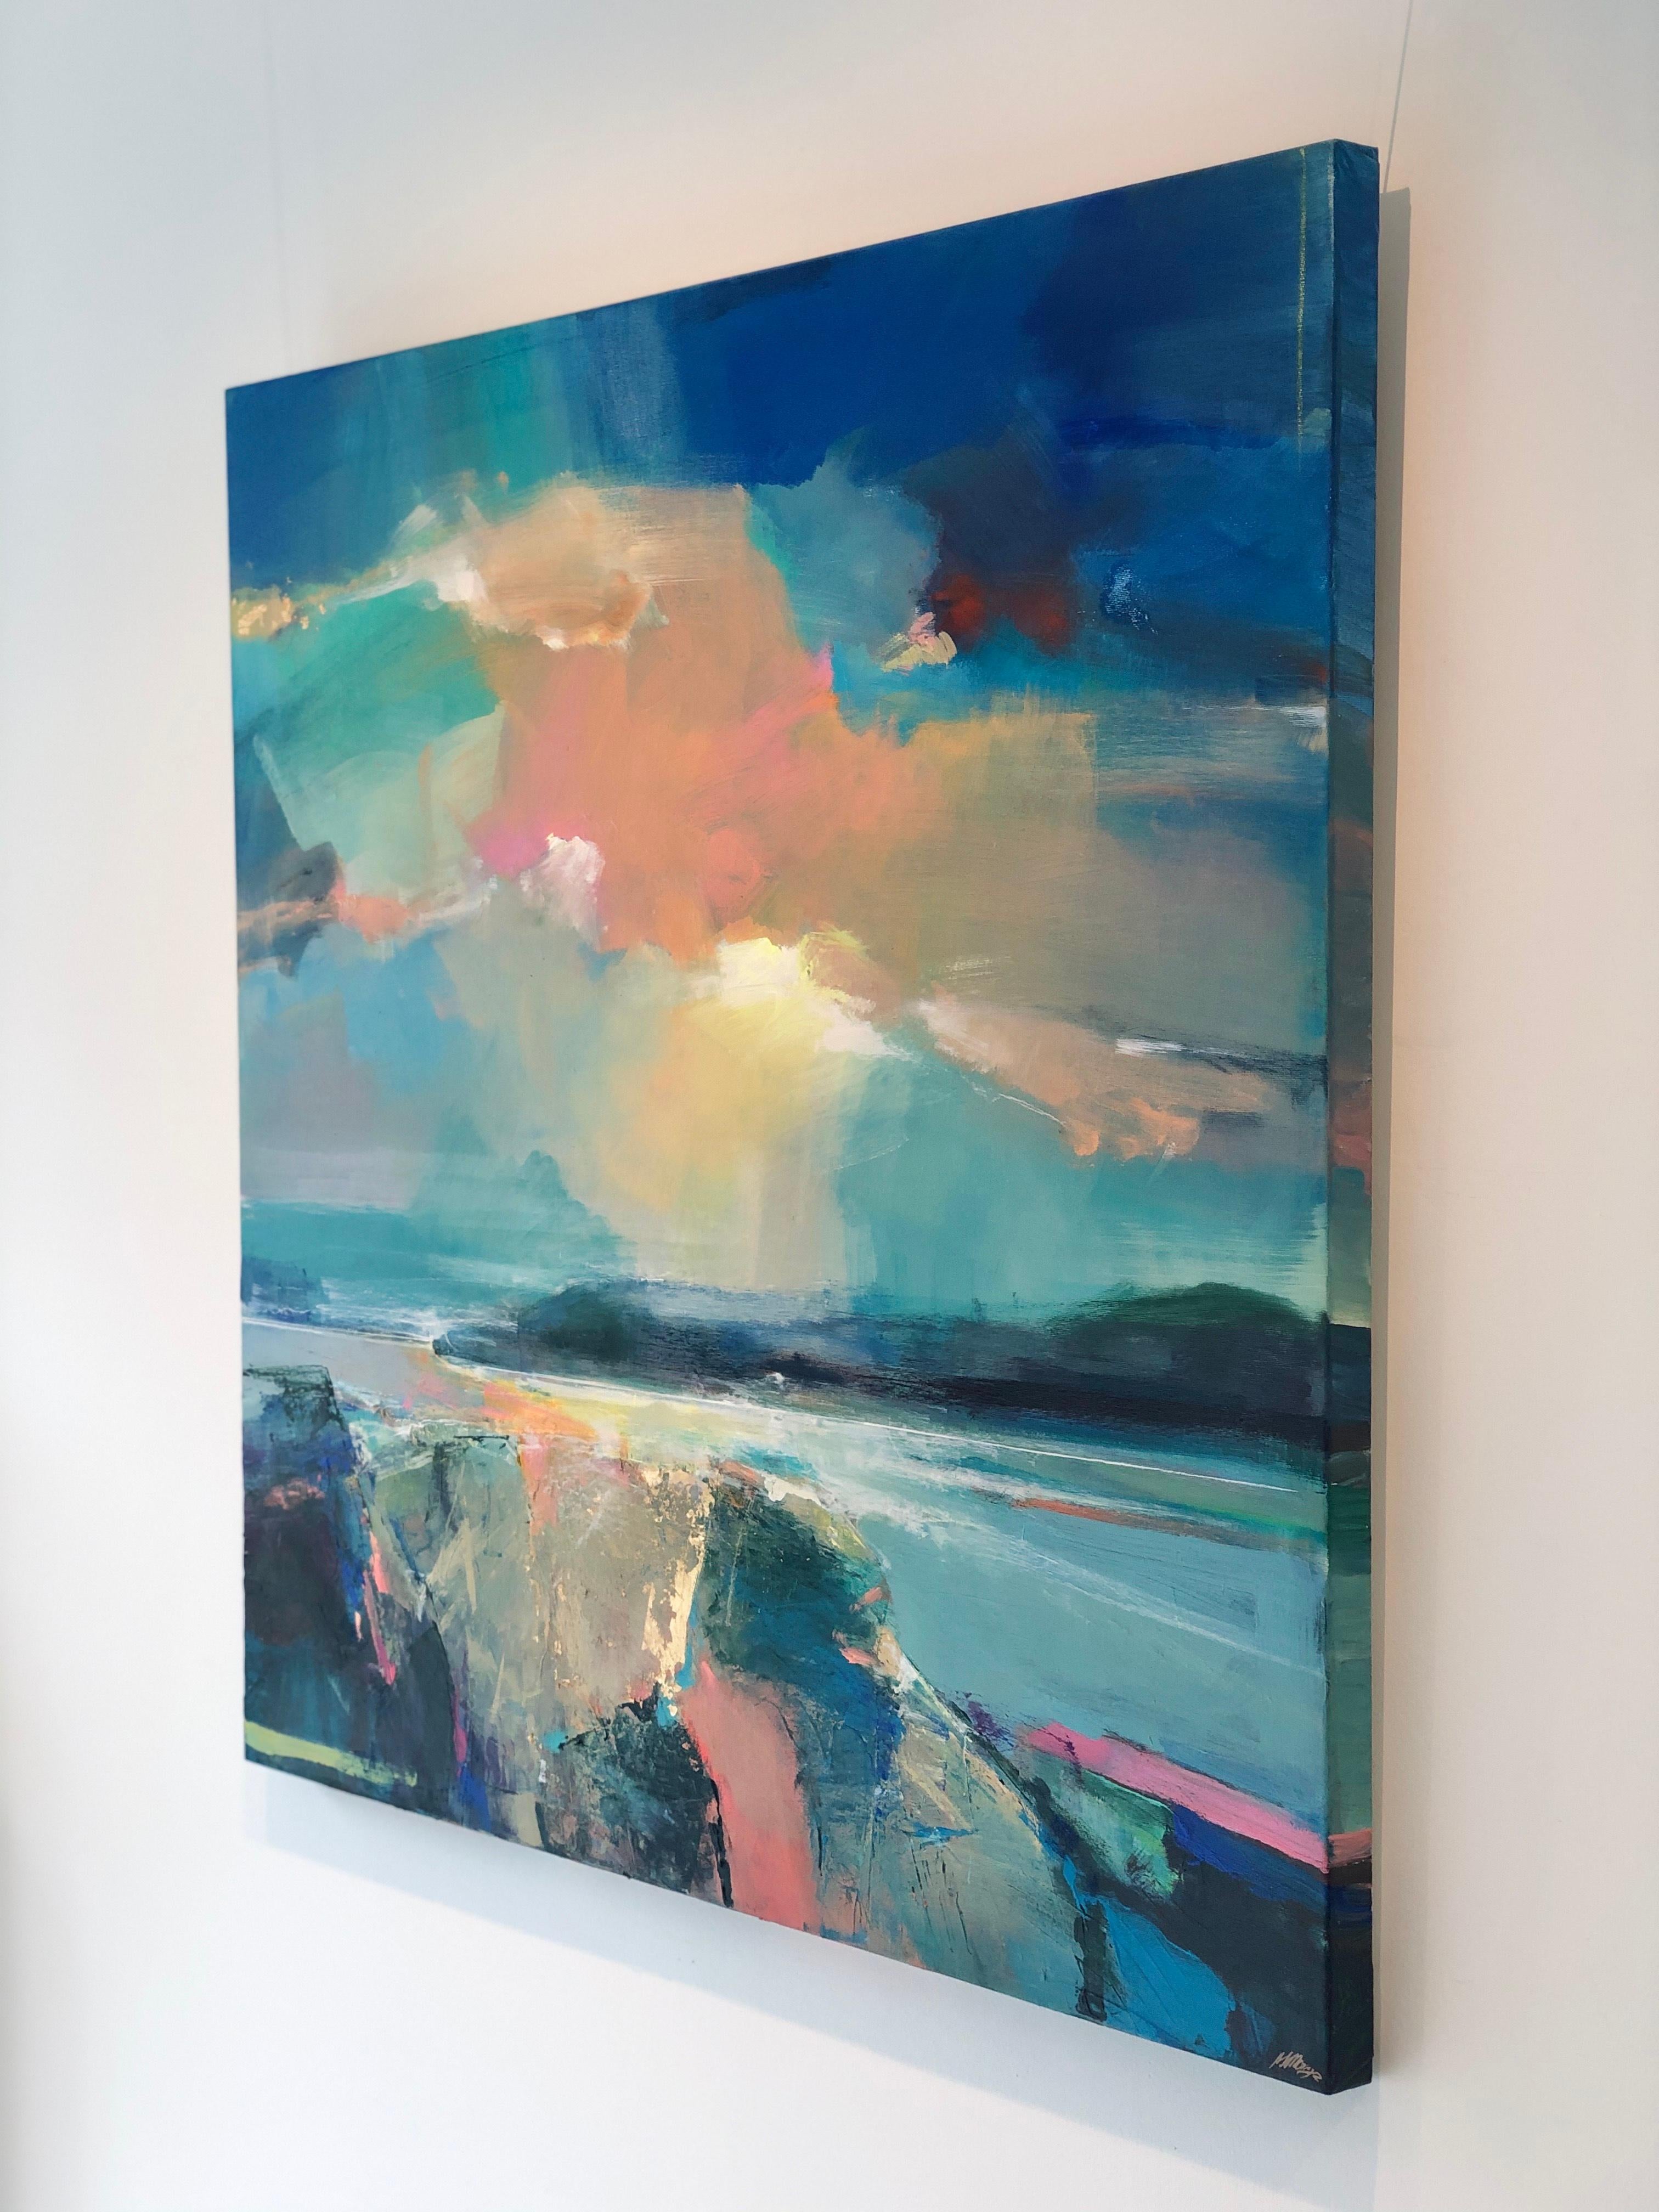 Warm Skies 5-Original abstract coastal seascape oil painting-contemporary Art - Abstract Painting by Magdalena Morey